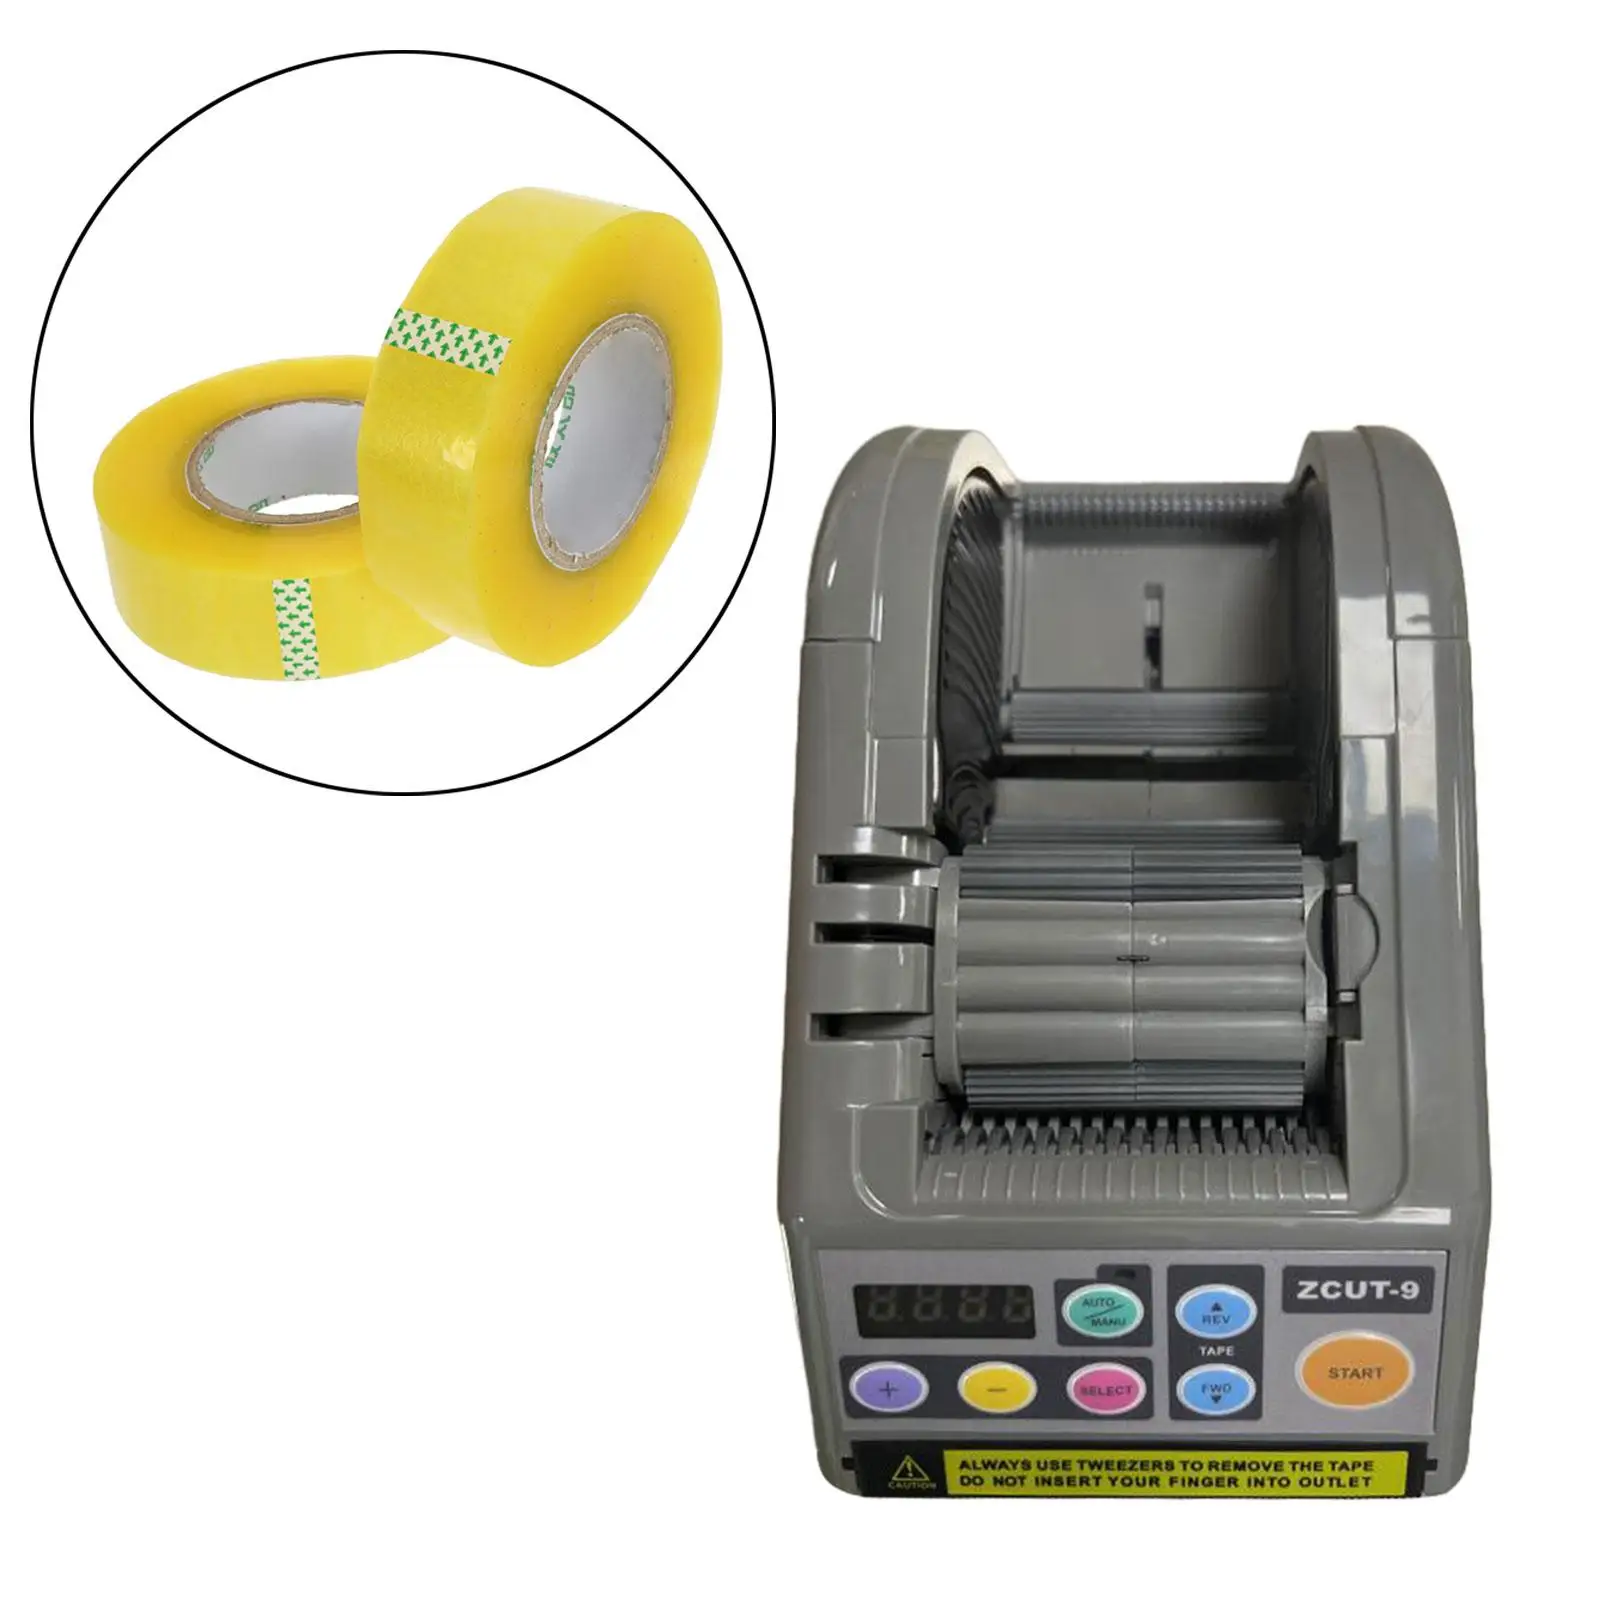 Automatic Tapes Cutting Machine 6-60mm Width Portable Tapes Cutter for Sealing Glue Masking Tape Double Sided Tape Fibers Fibers